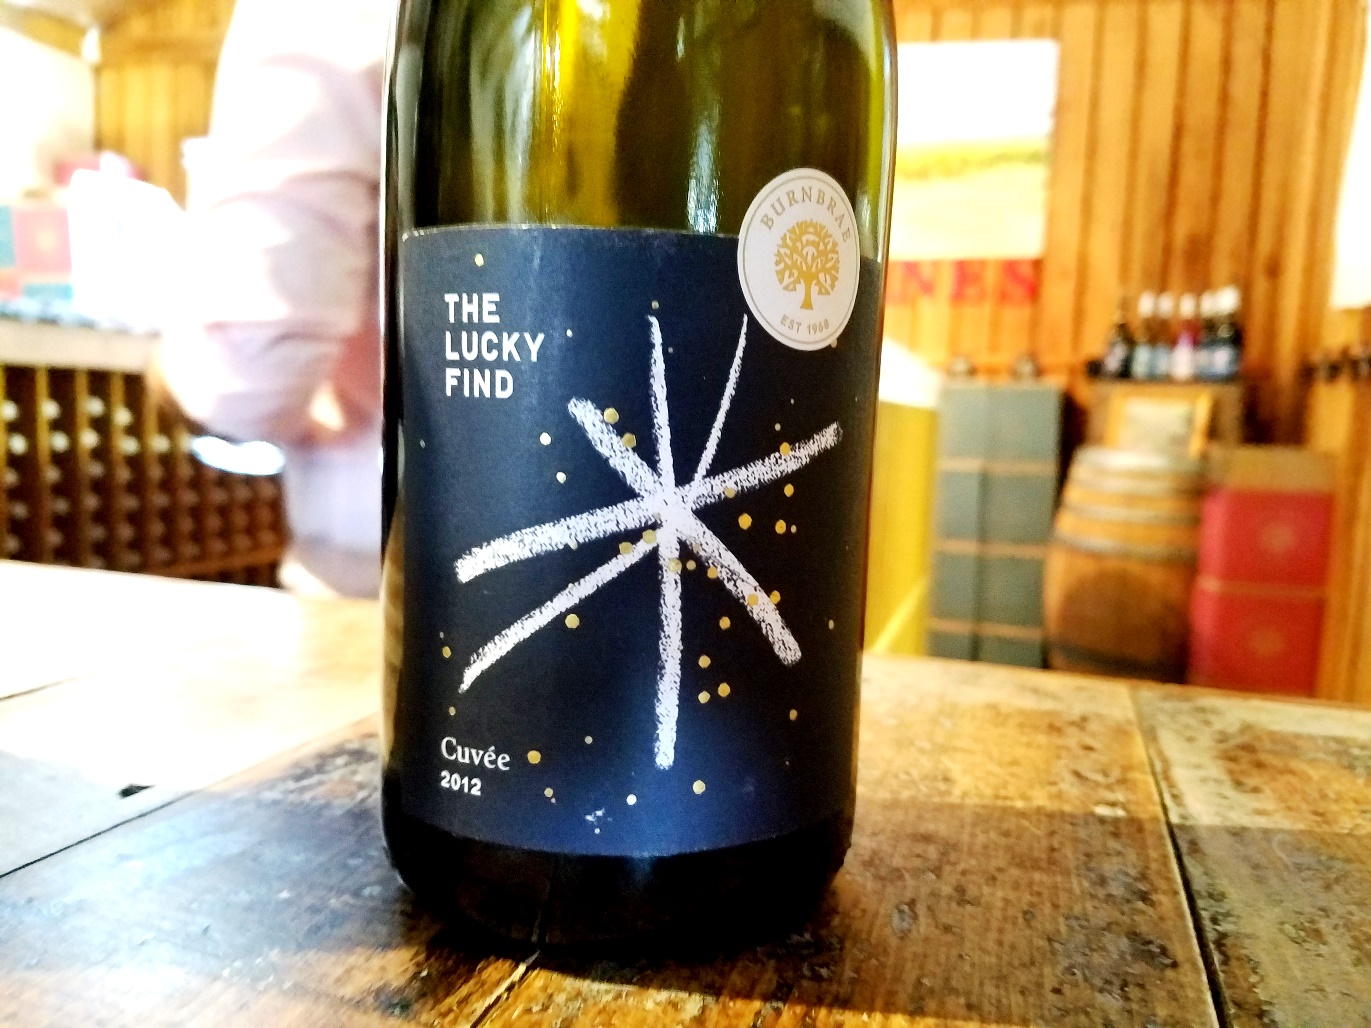 Burnbrae, The Lucky Find Cuvée 2012, Australia, Wine Casual